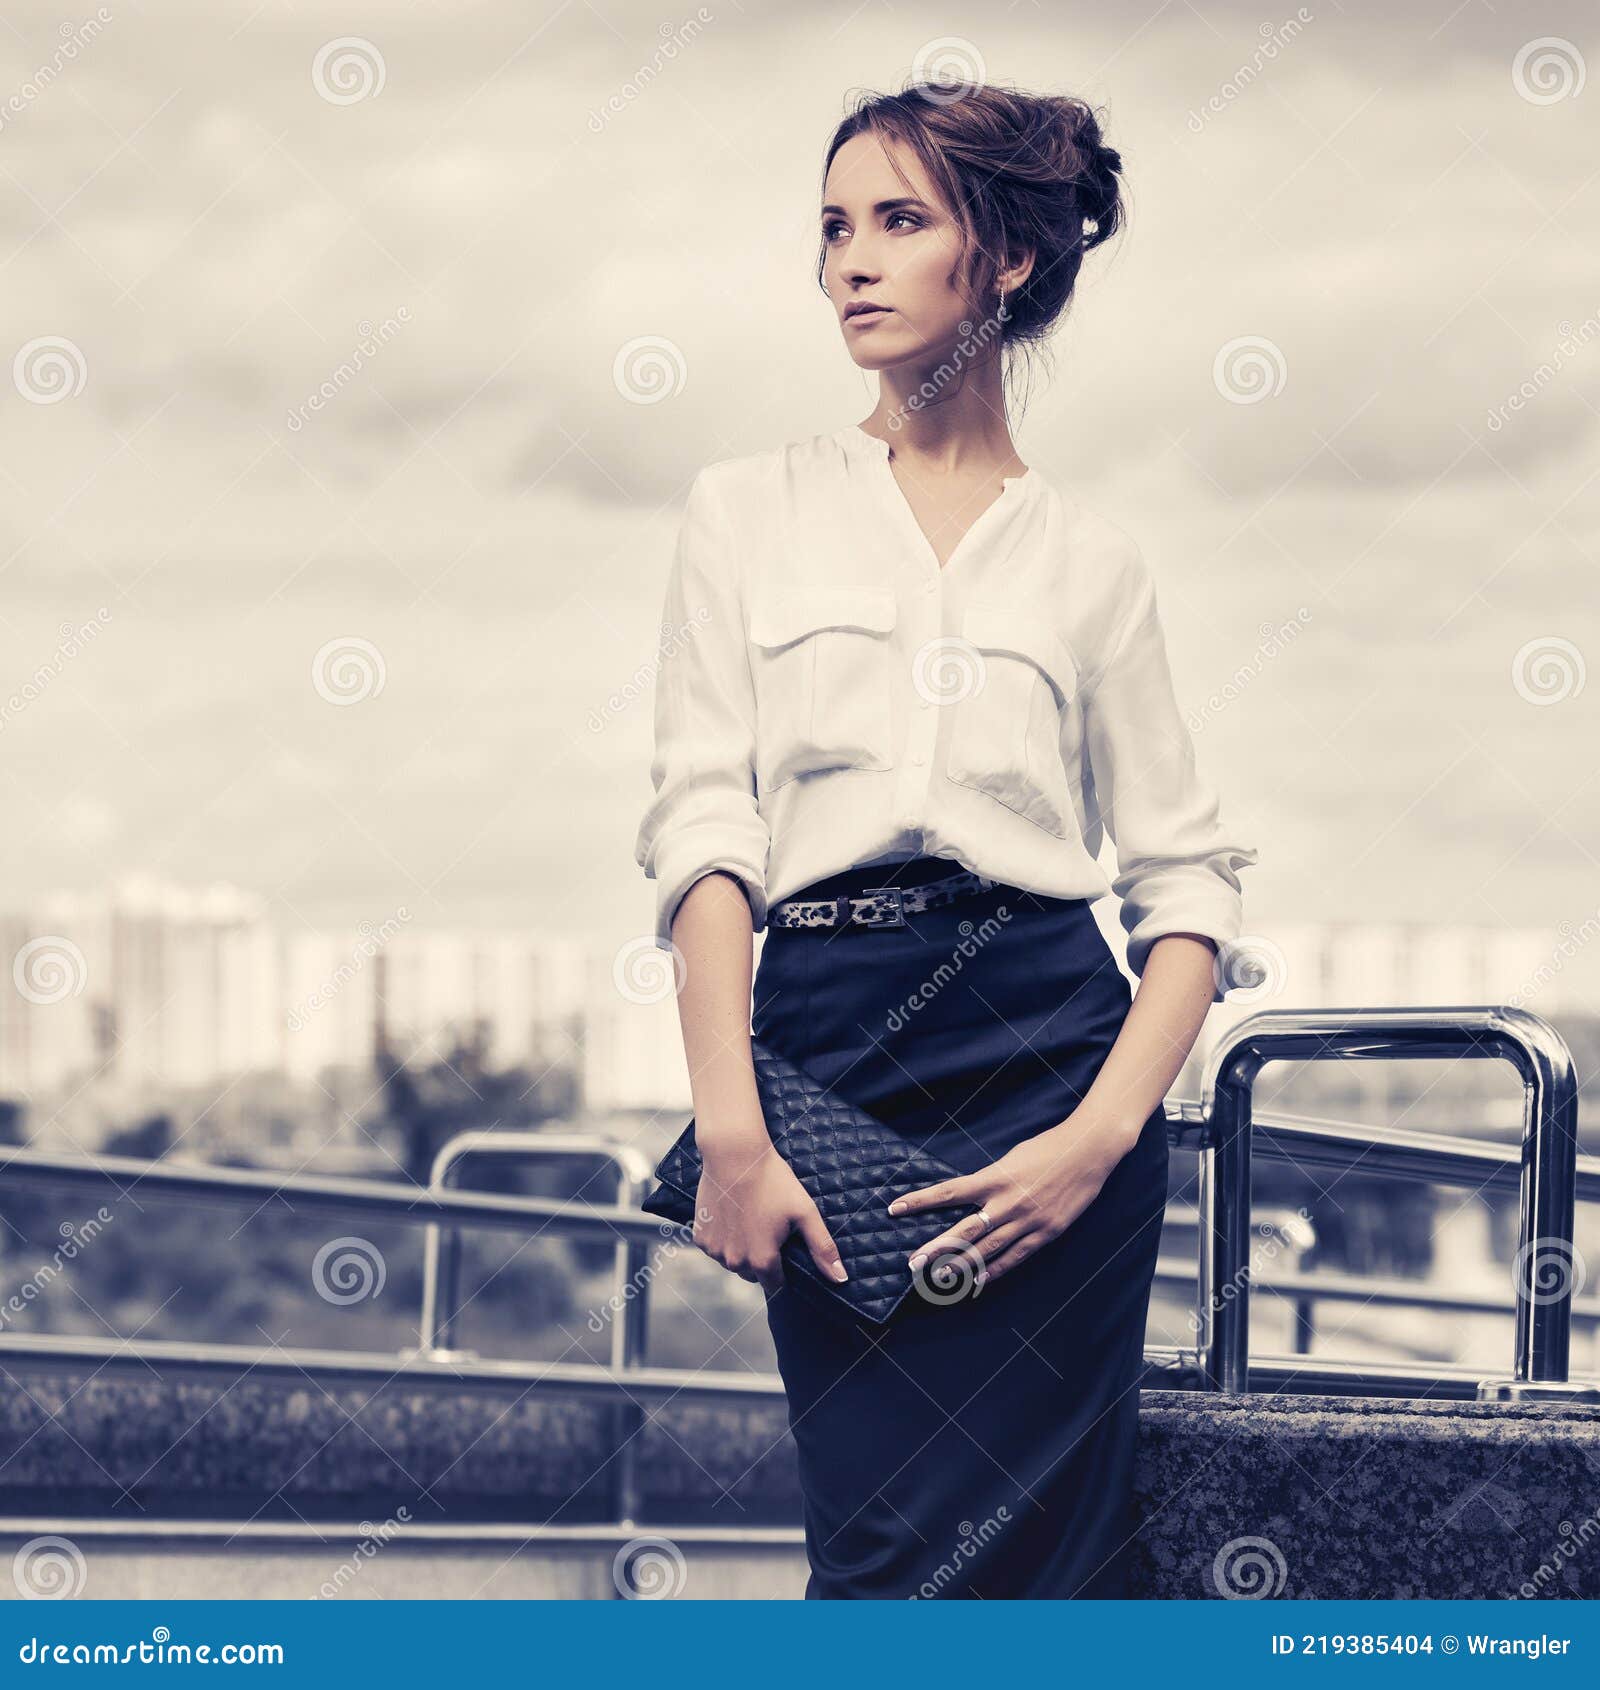 Young Fashion Business Woman in White Shirt and Black Pencil Skirt ...